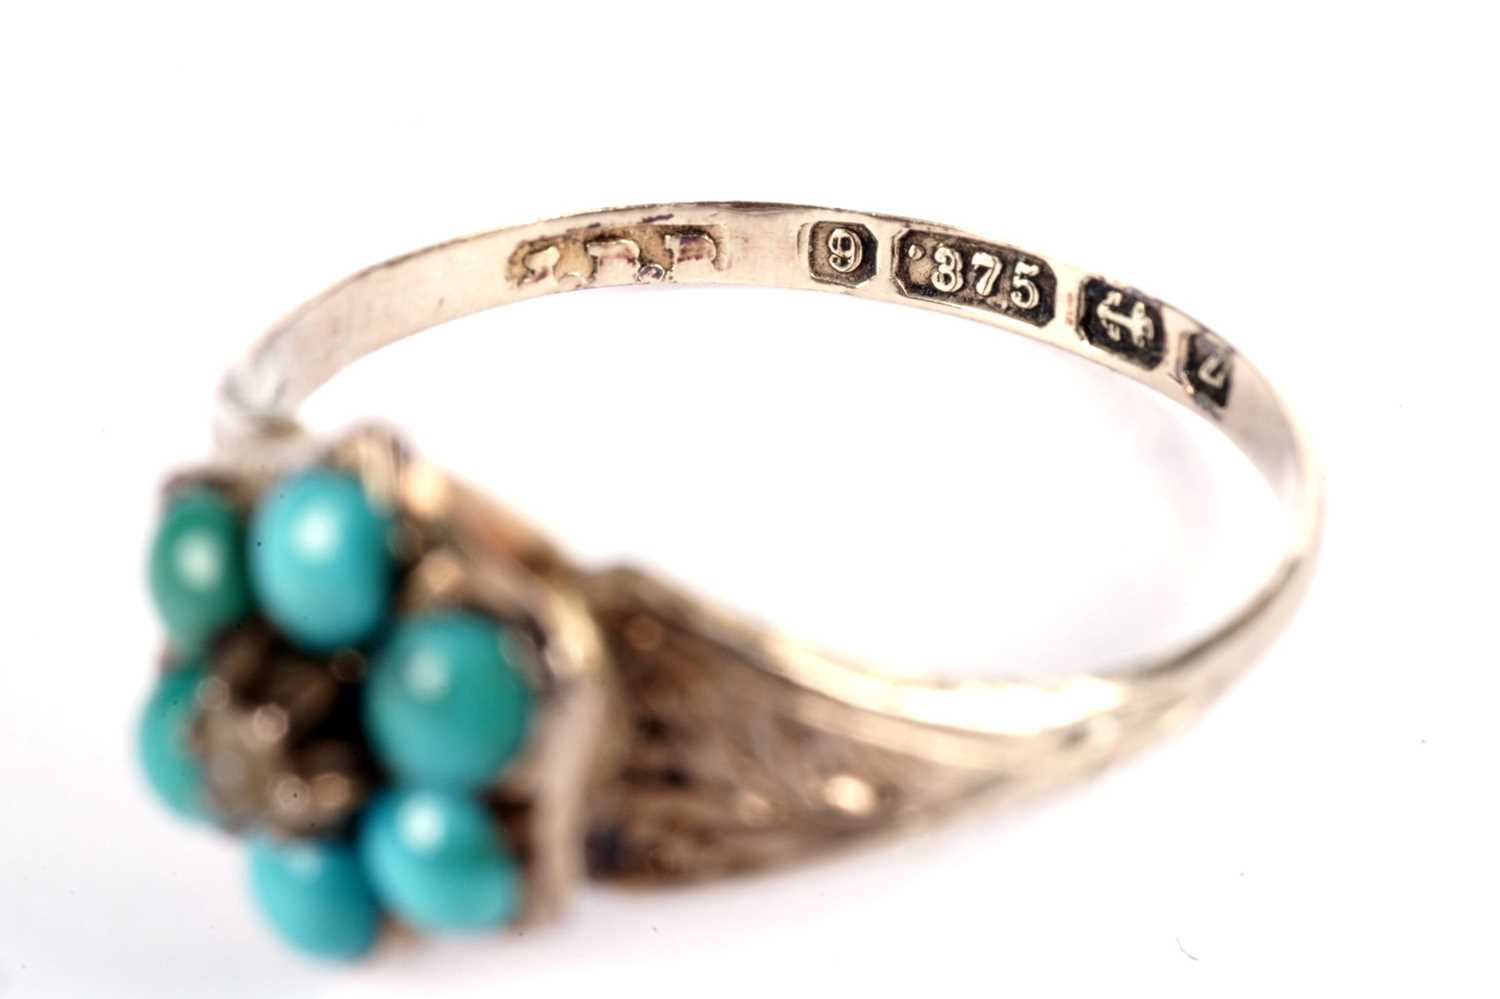 A Victorian Romantic Period turquoise and seed pearl flowerhead ring - Image 3 of 3